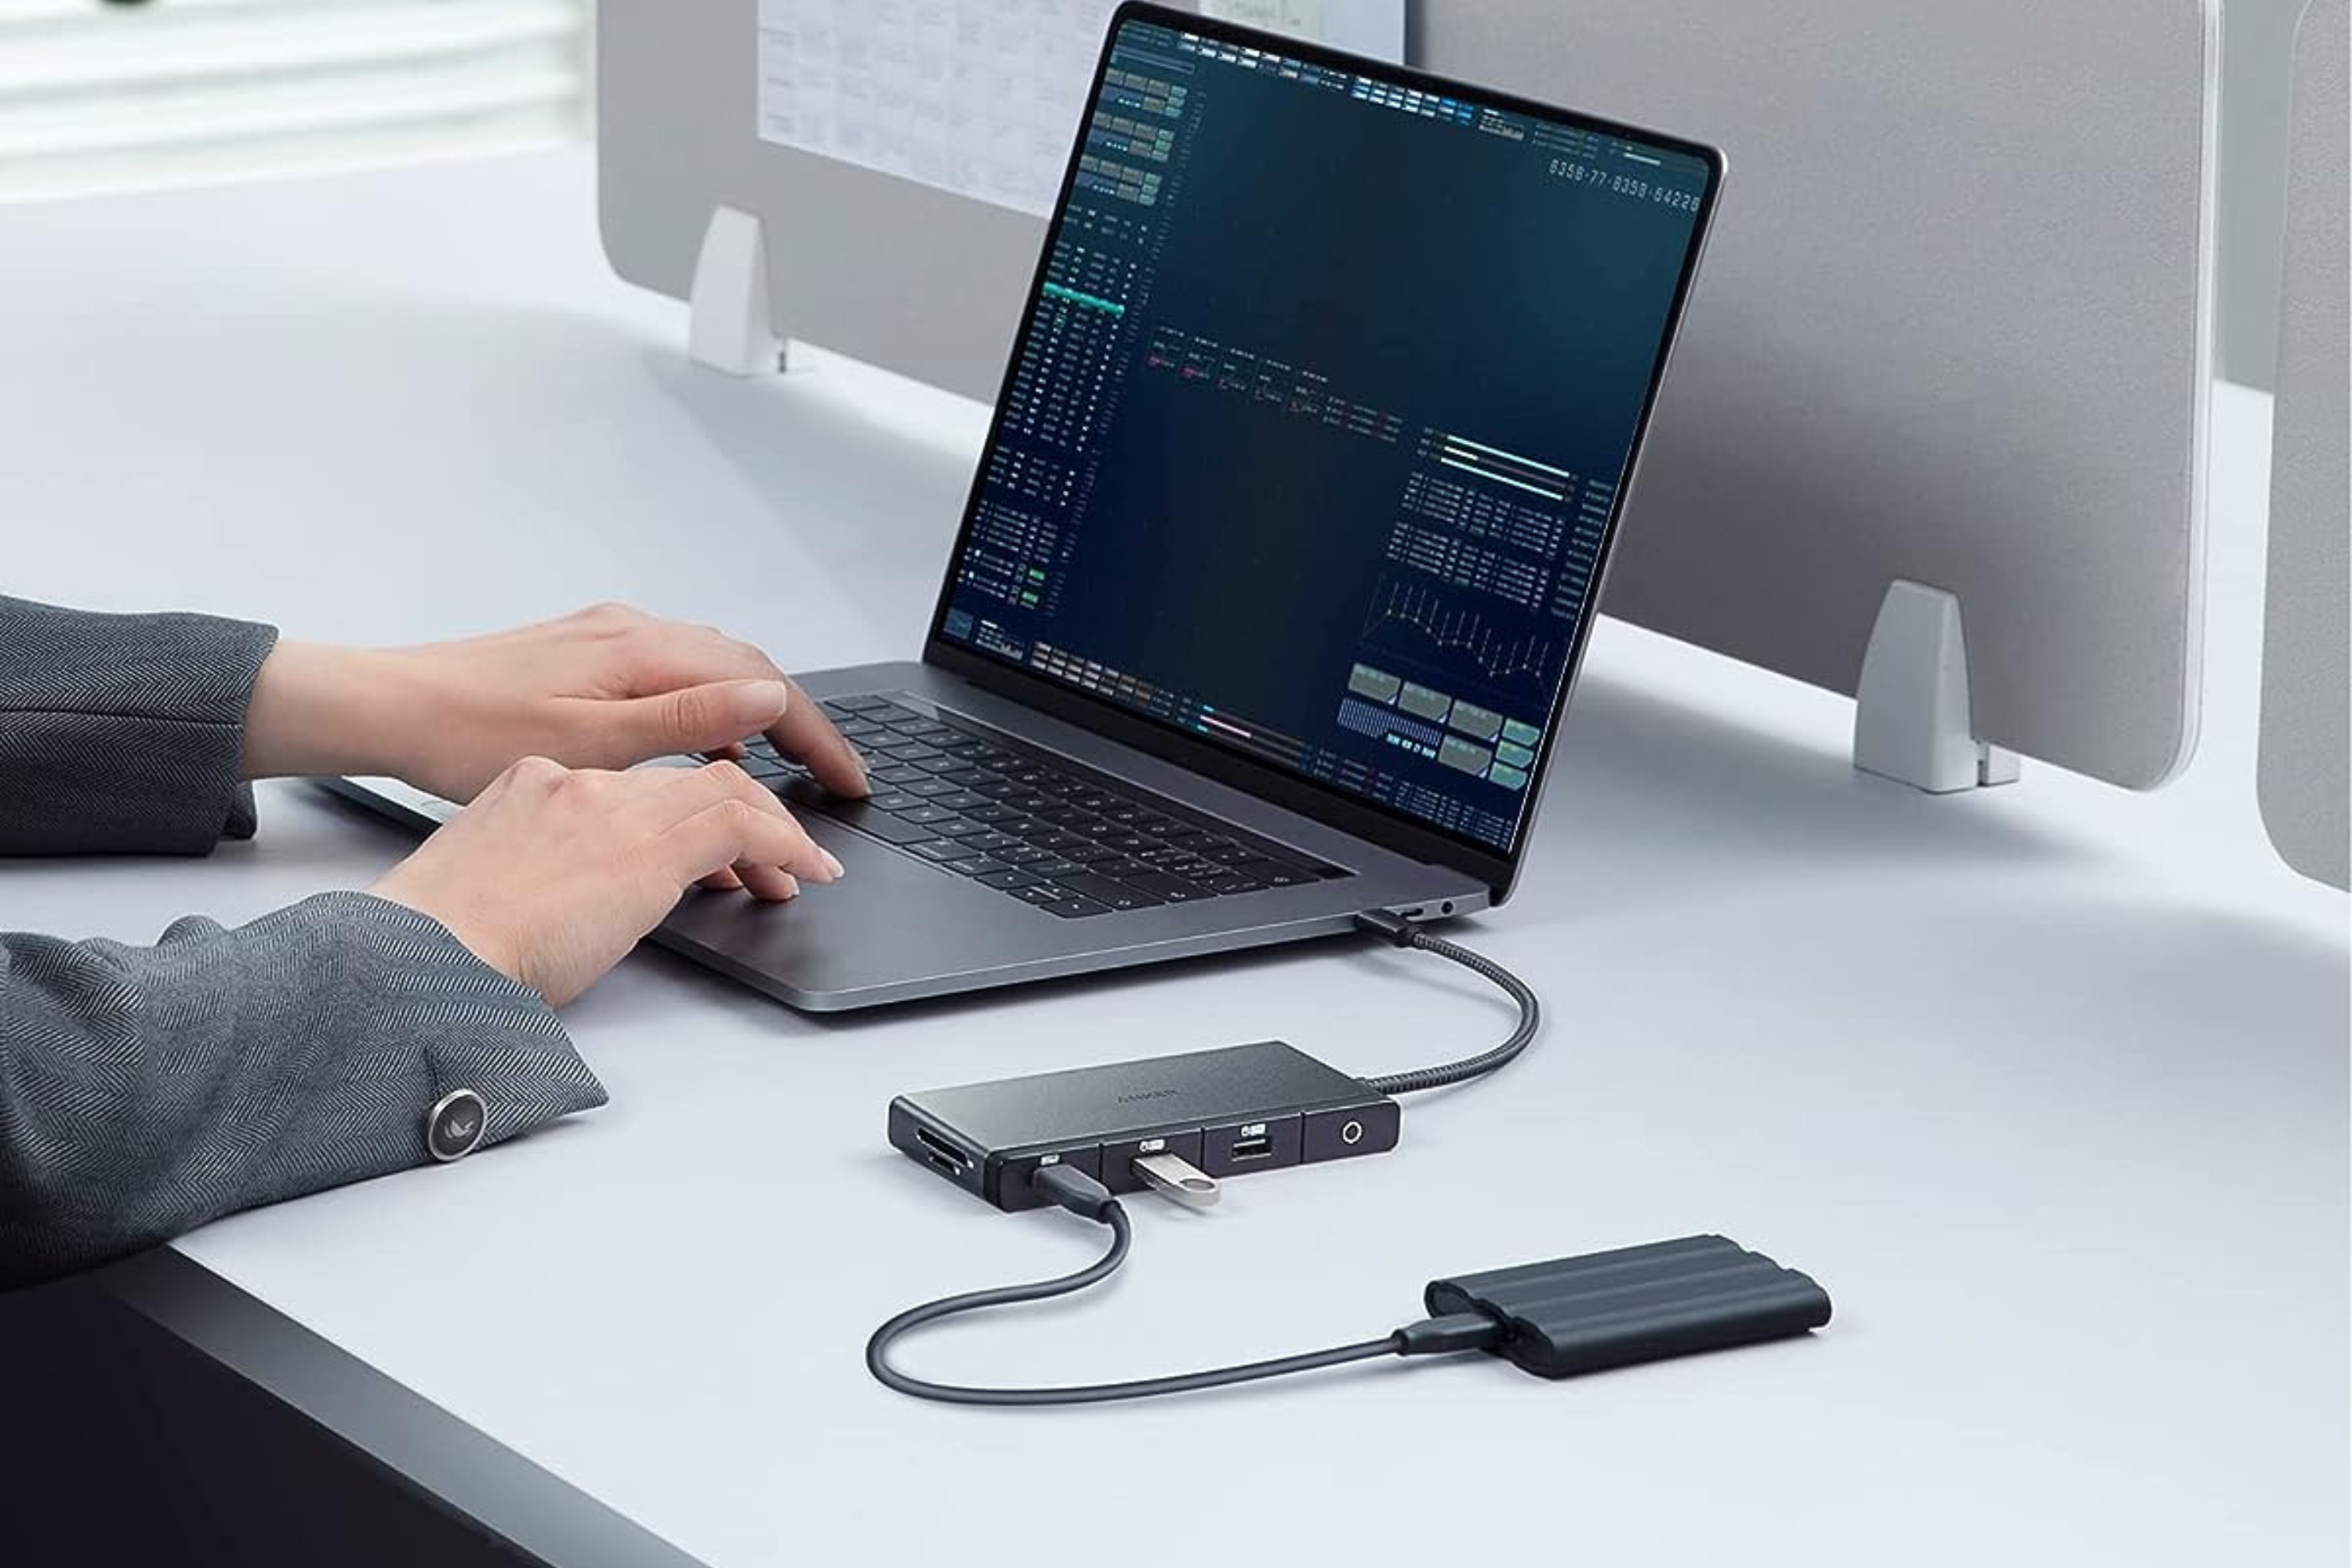 Anker 552 USB C Hub plugged into laptop with SSD and USB drive 